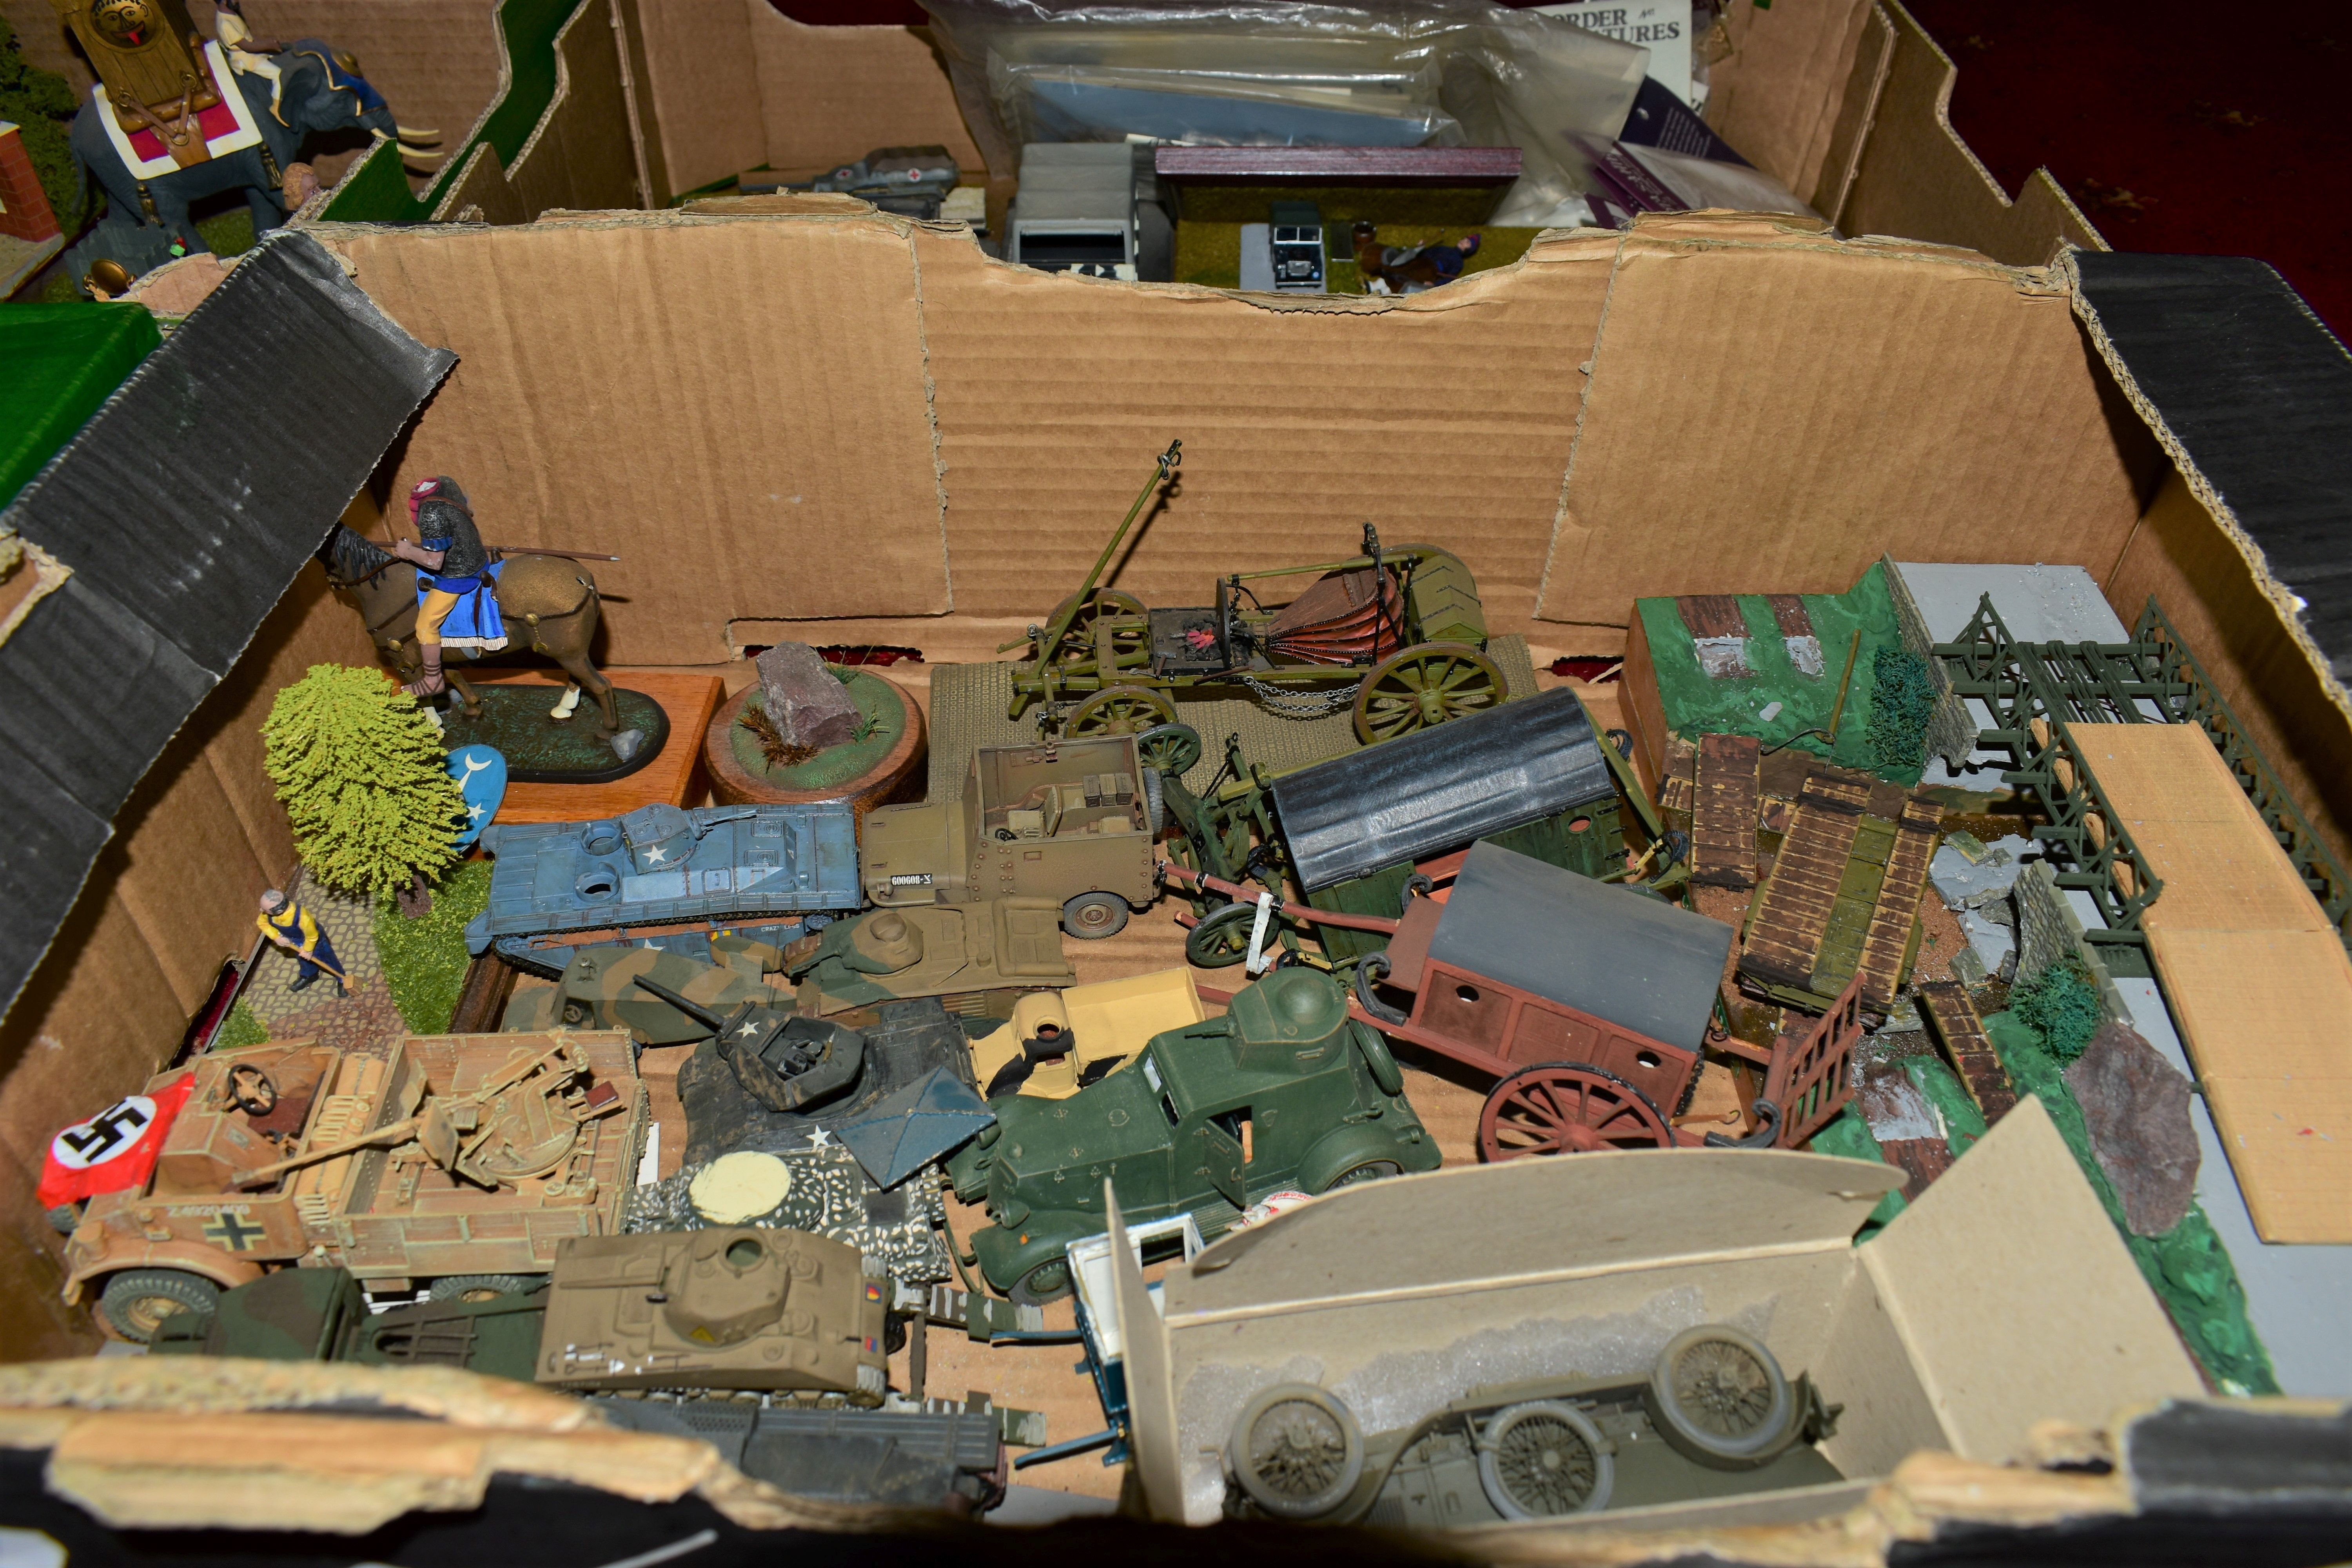 A QUANTITY OF ASSORTED MODEL DIORAMAS, FIGURES AND VEHICLES, majority are of military subjects and - Image 2 of 7